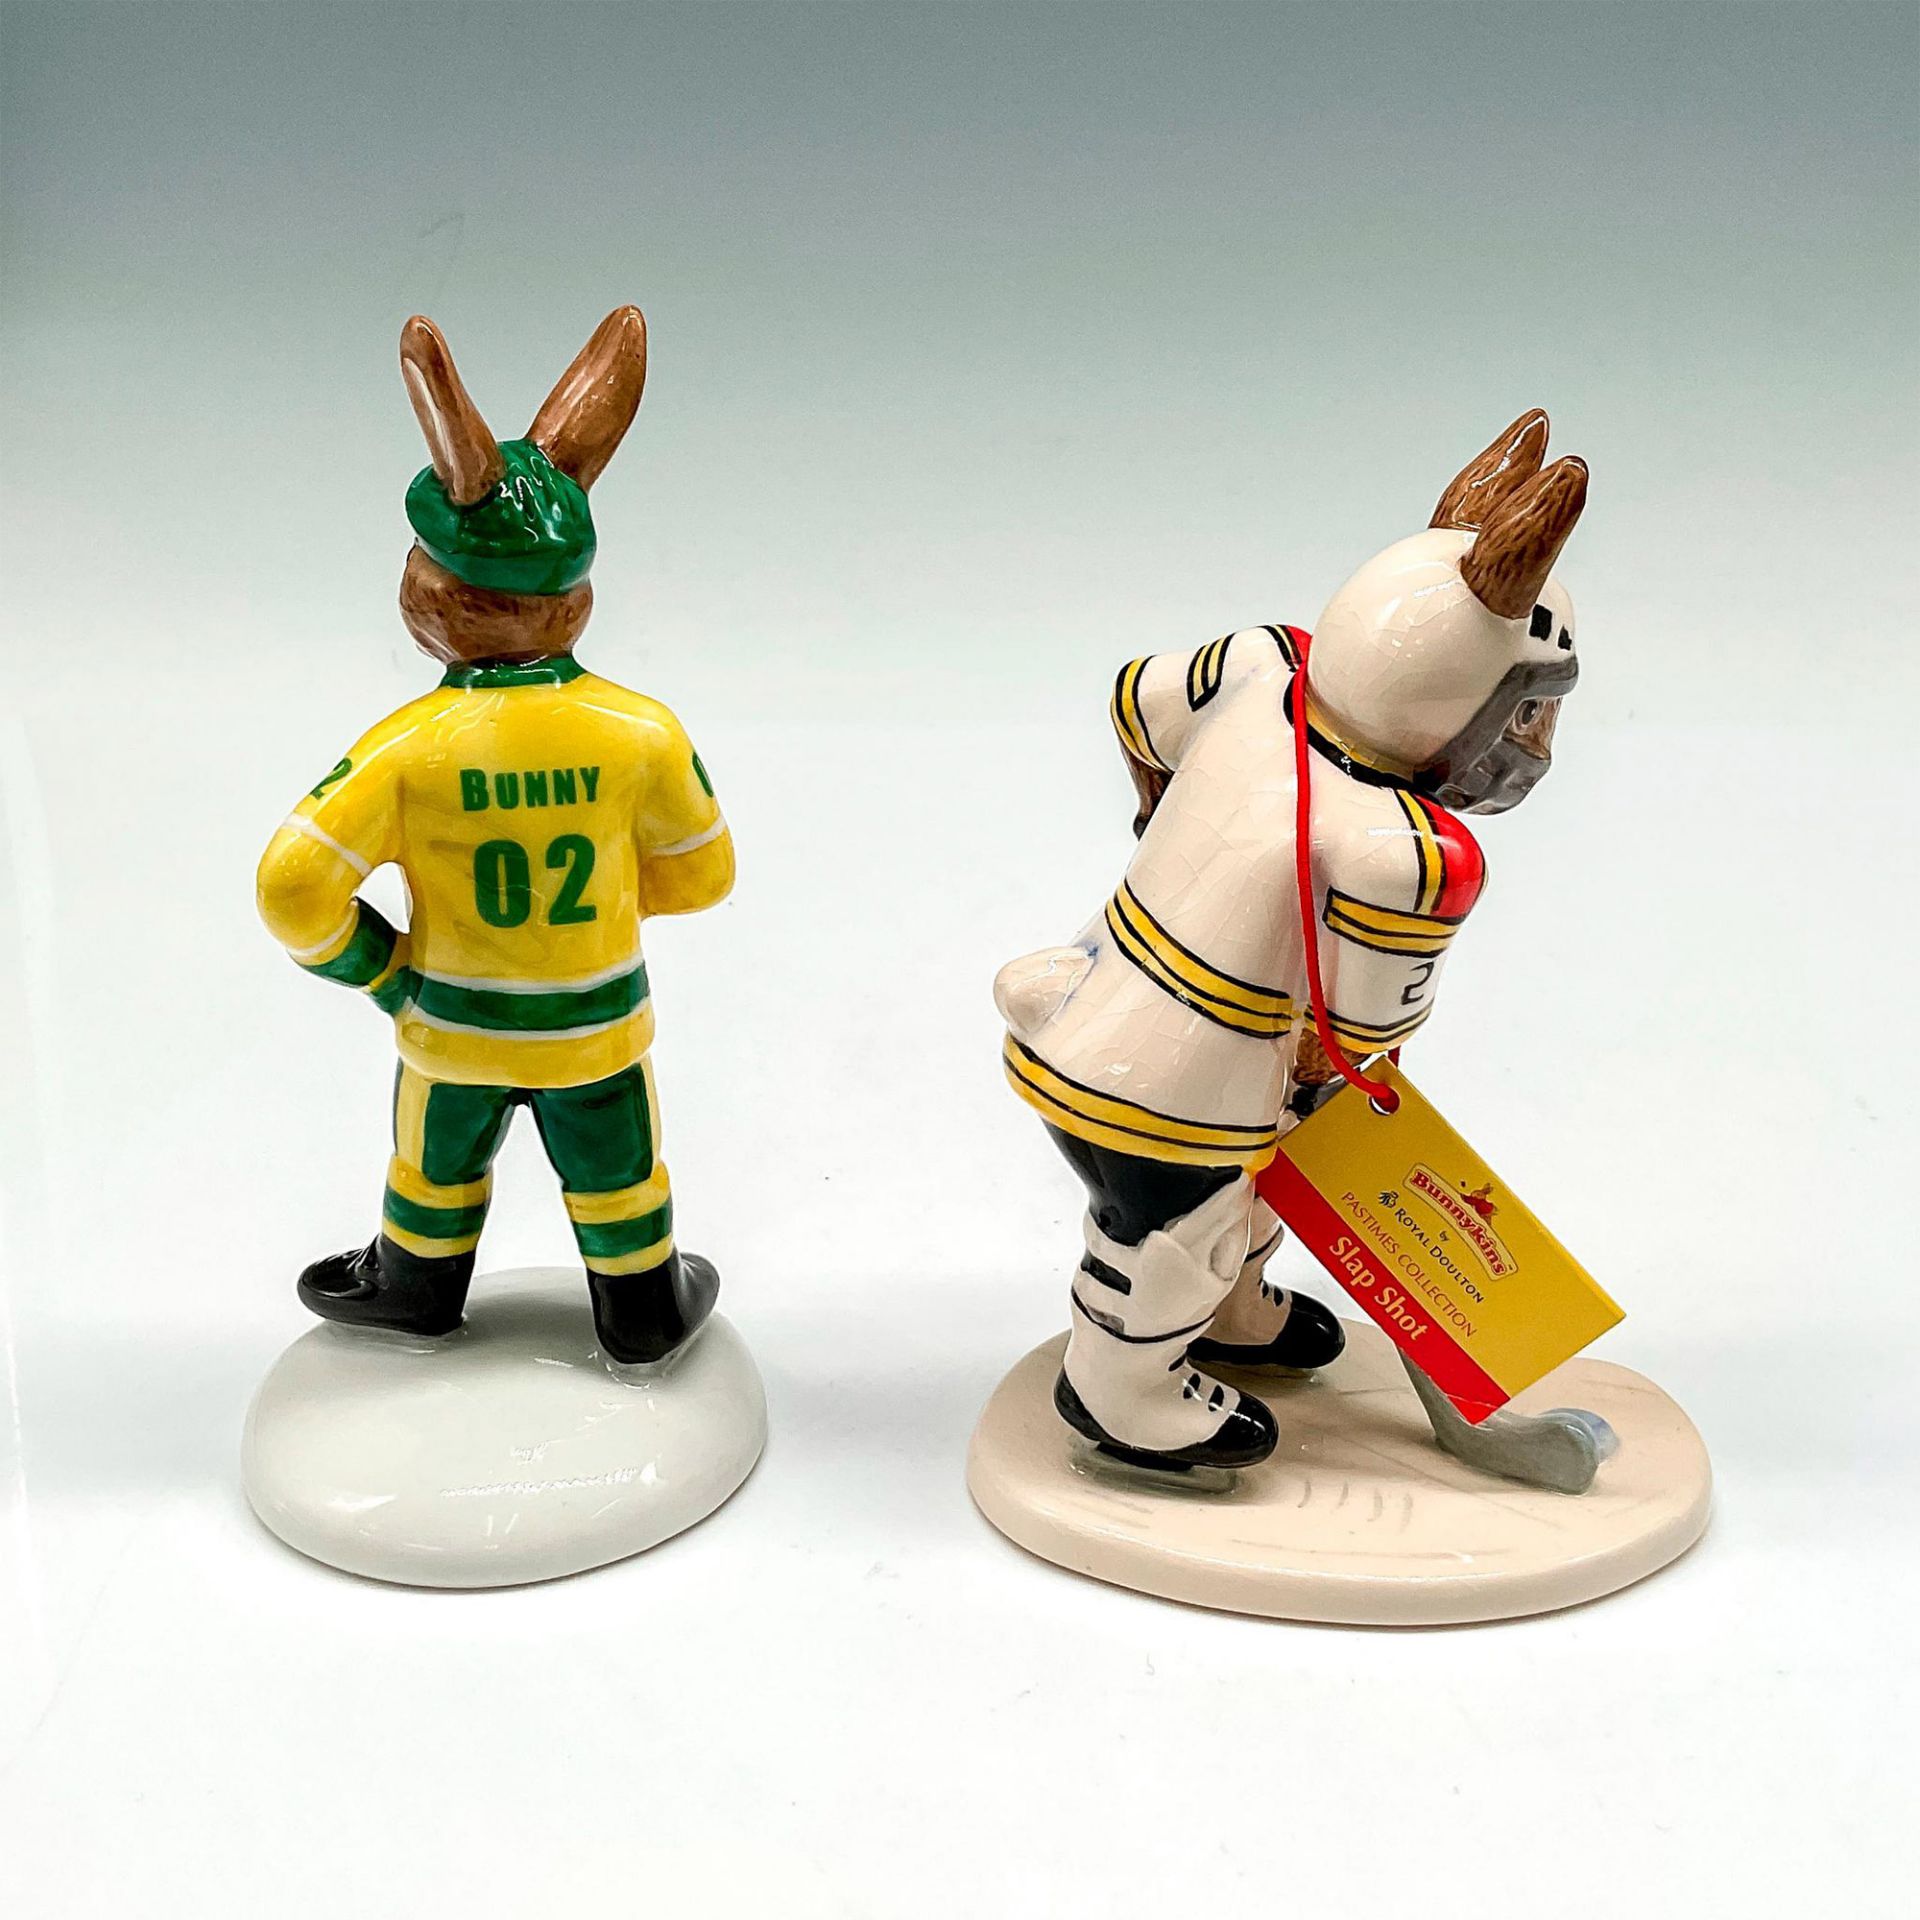 2pc Royal Doulton Bunnykins Figurines, Sports Pastimes - Image 2 of 3